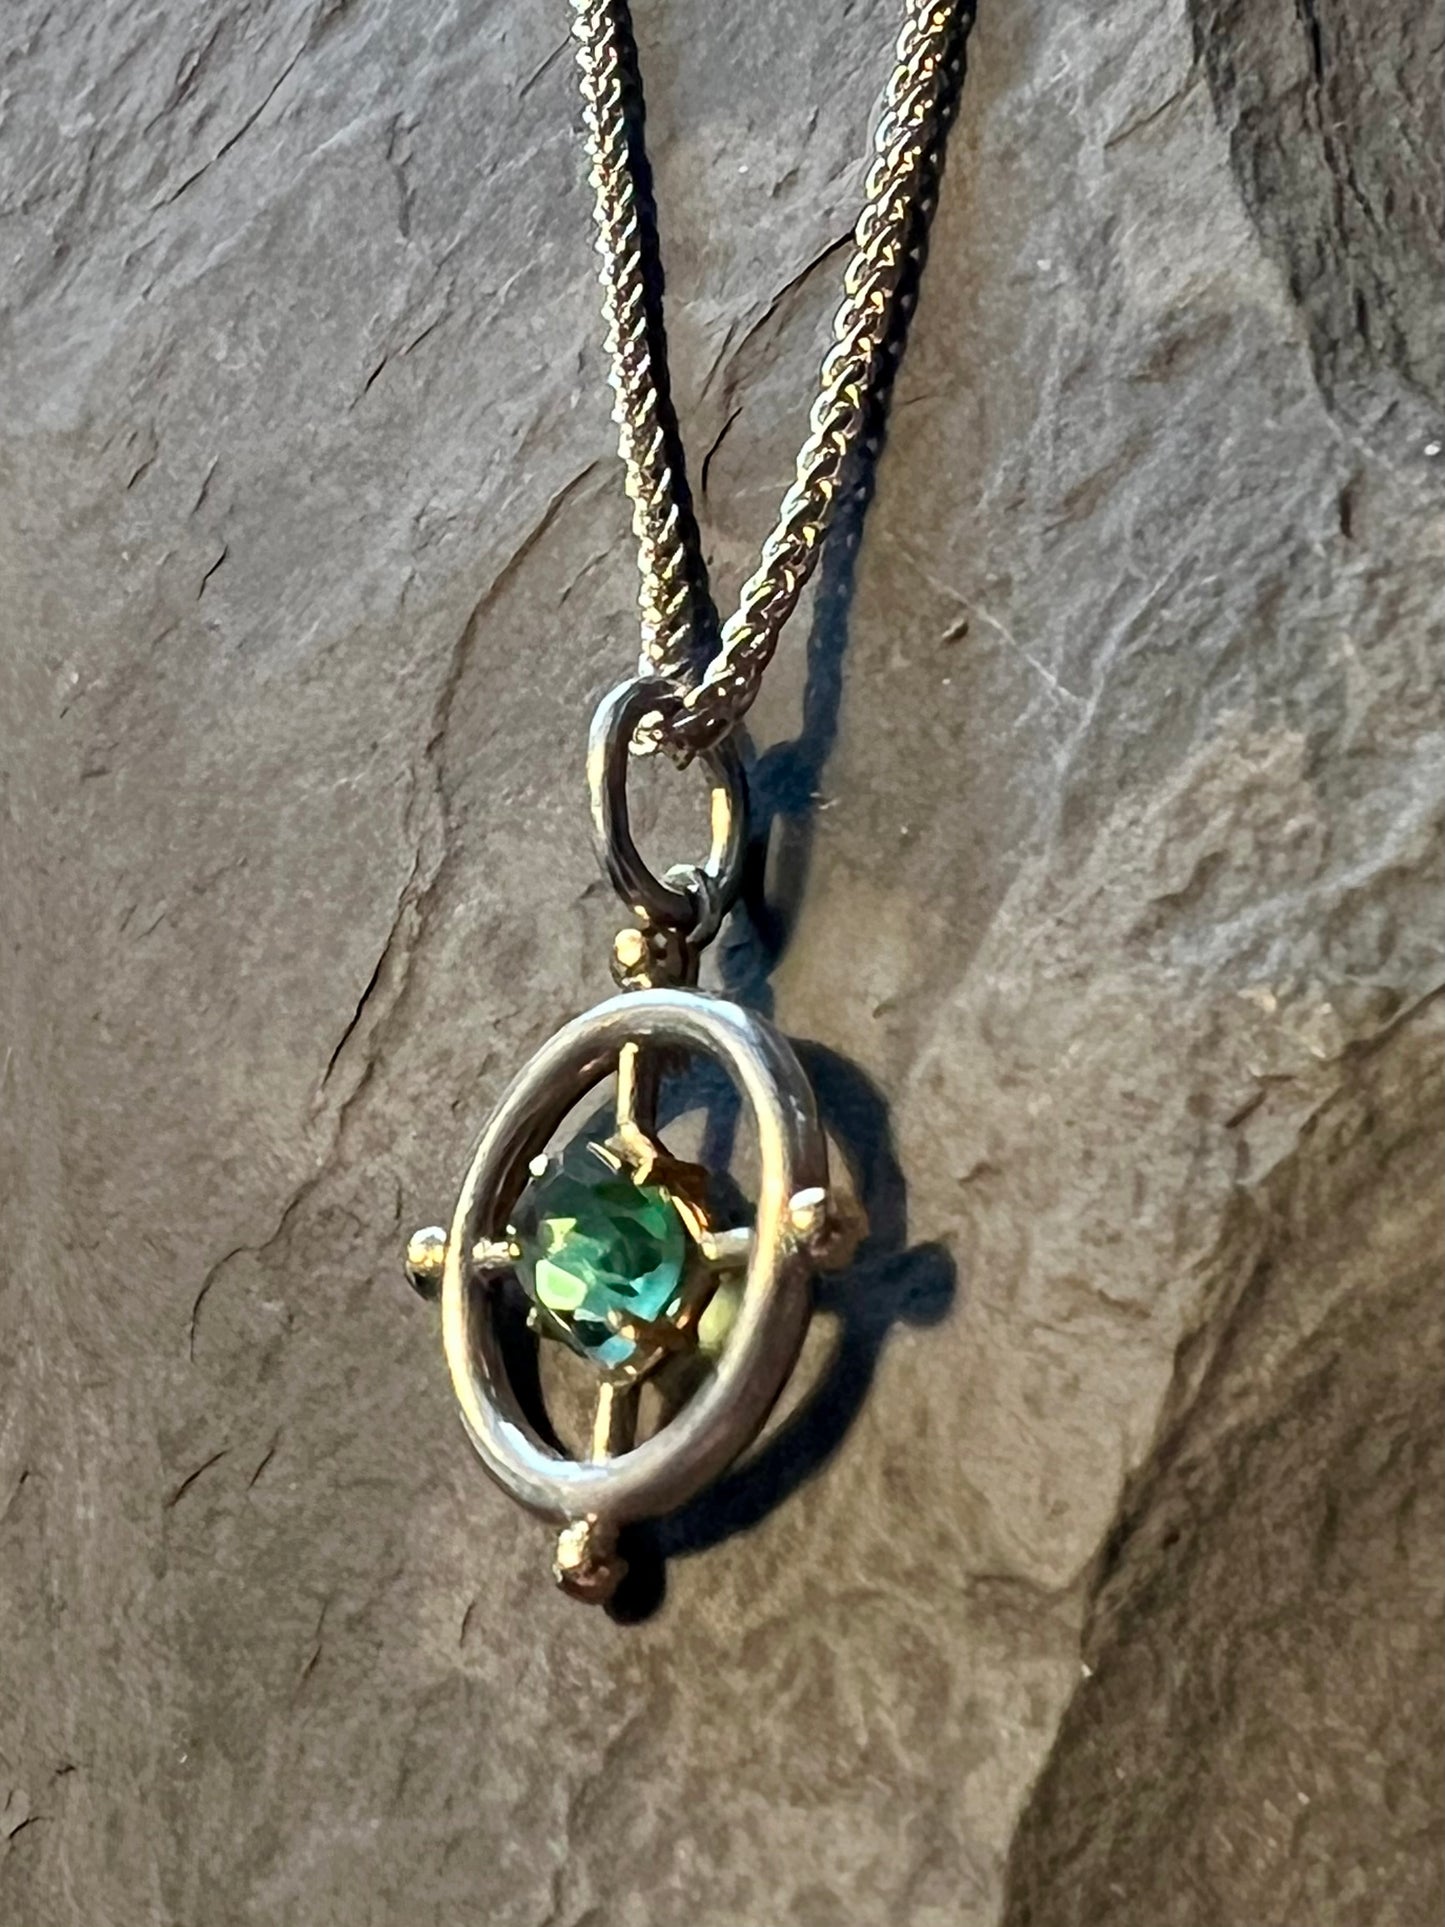 True North Green Tourmaline Pendant - One of a Kind Necklace